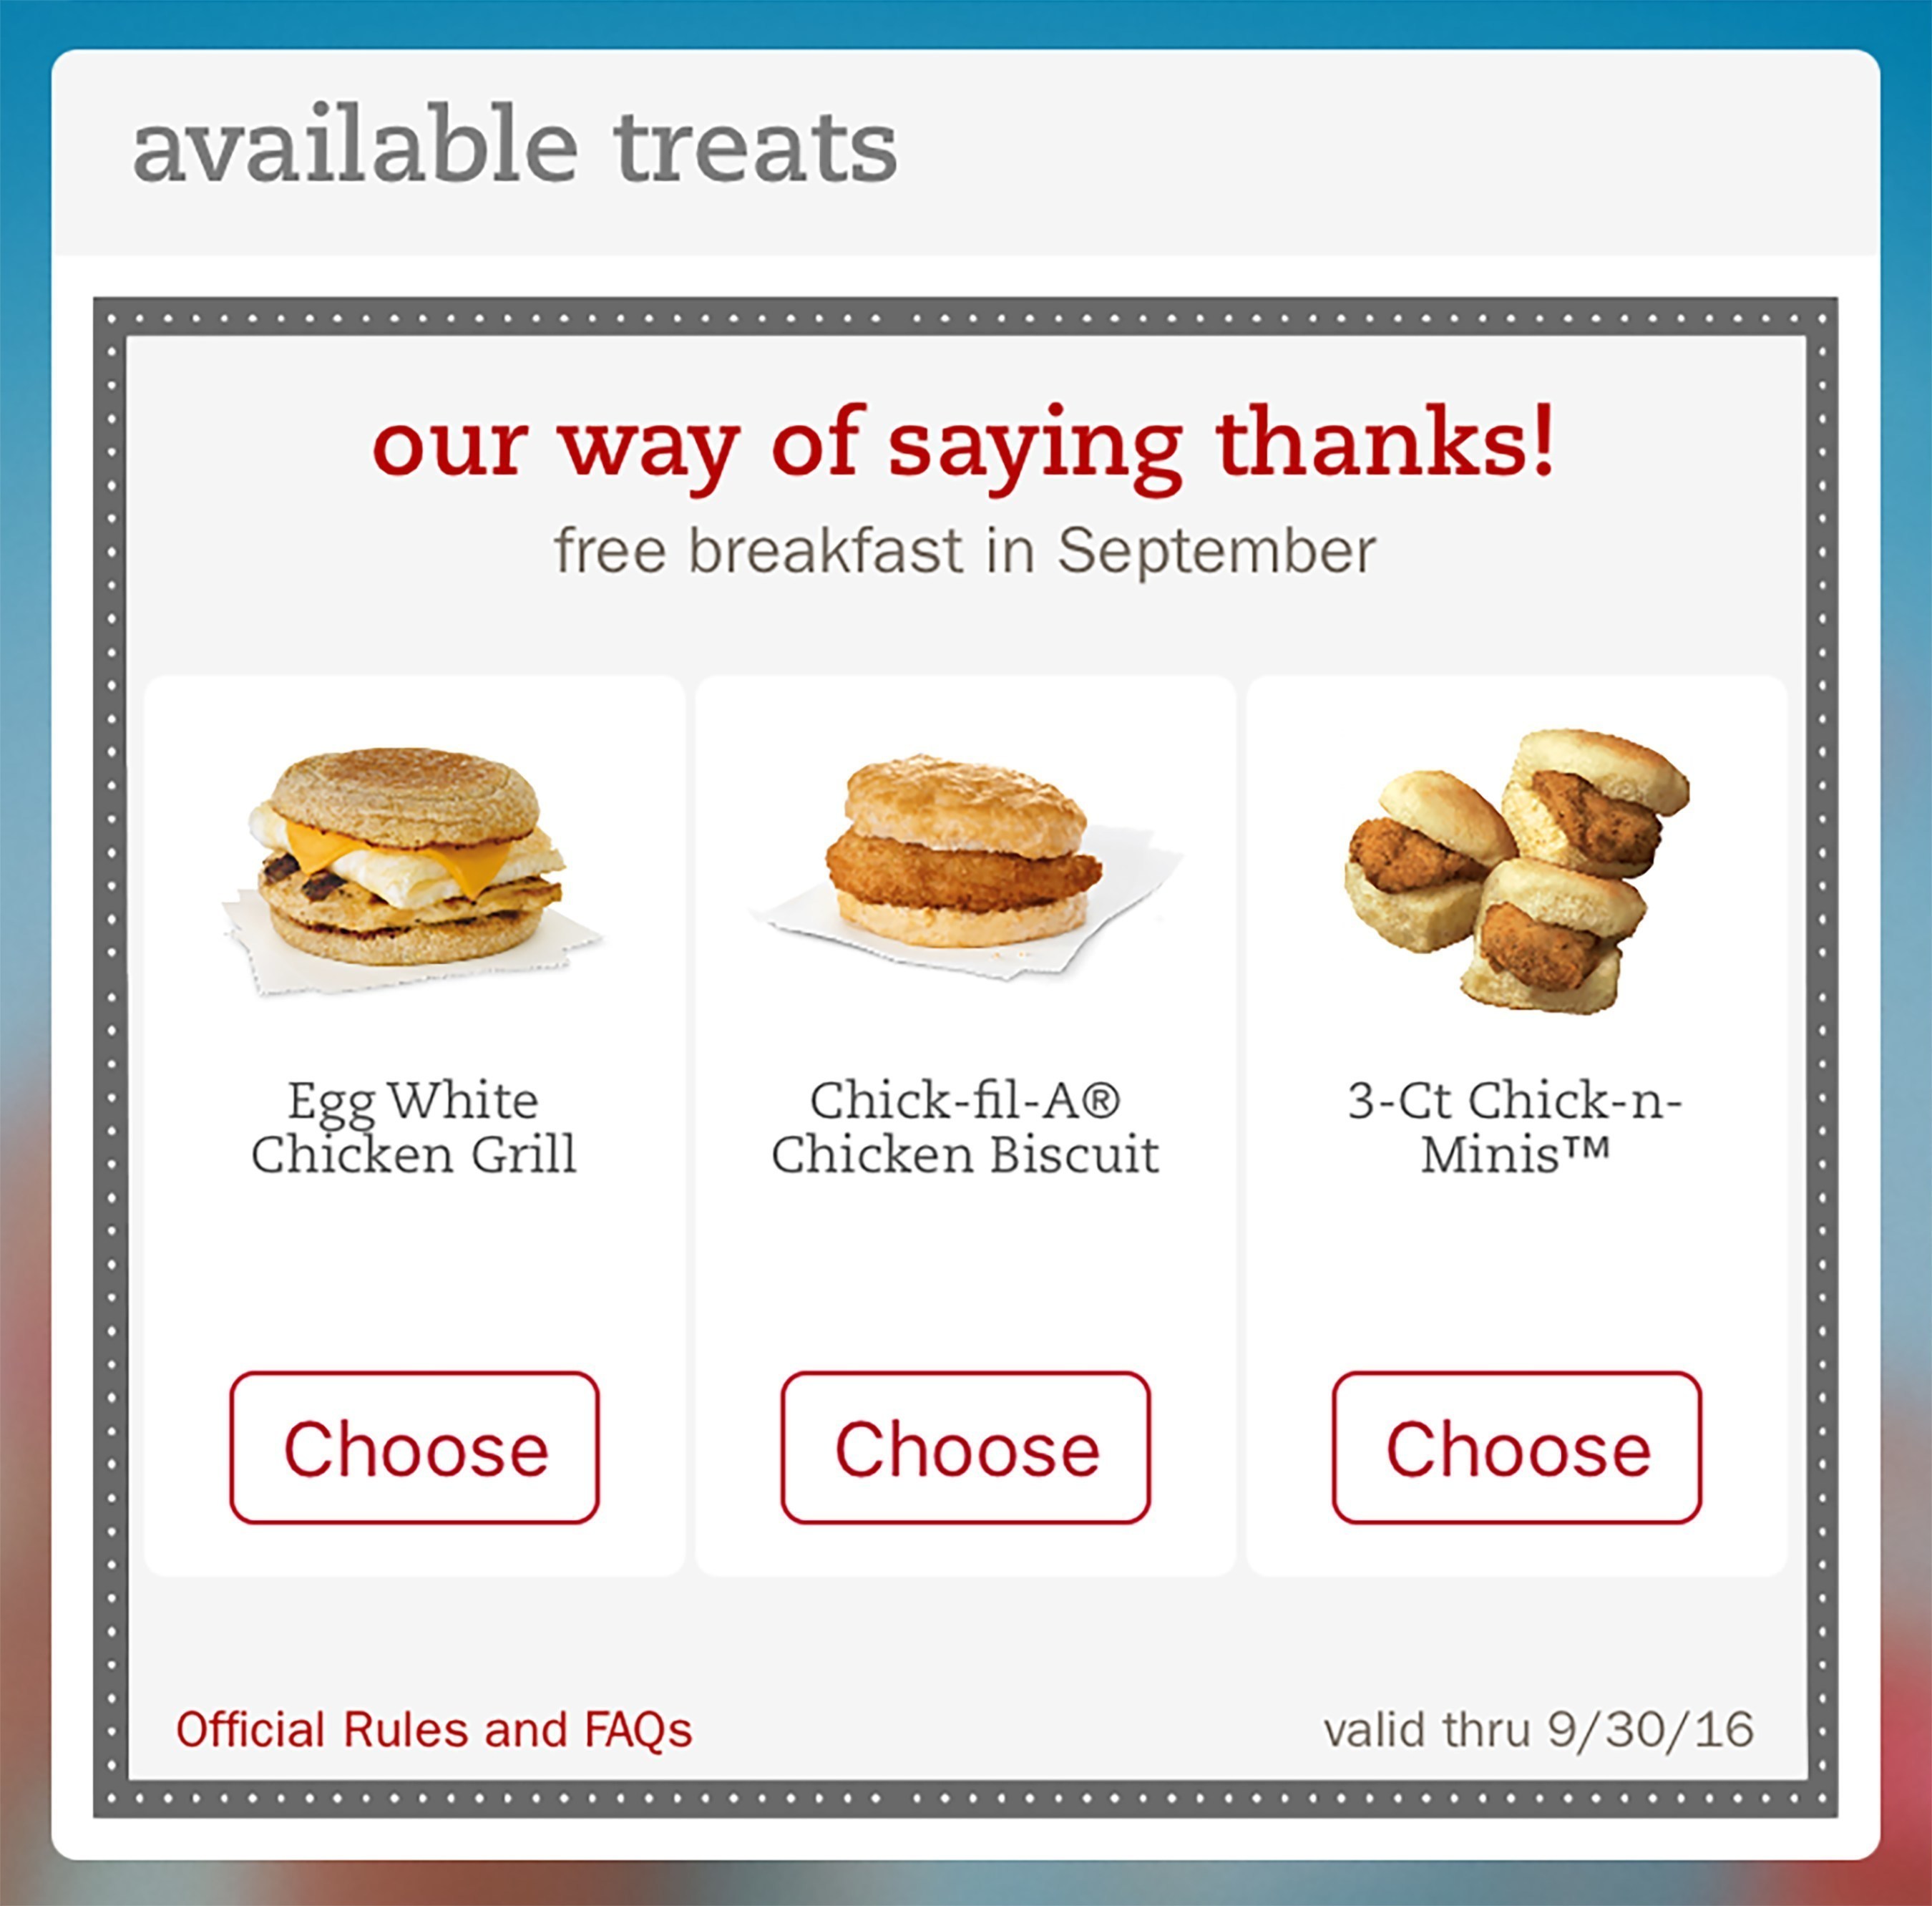 Any customer who downloads (or updates) the Chick-fil-A One app through September 10 will receive an offer for a free breakfast entree, redeemable through September 30.